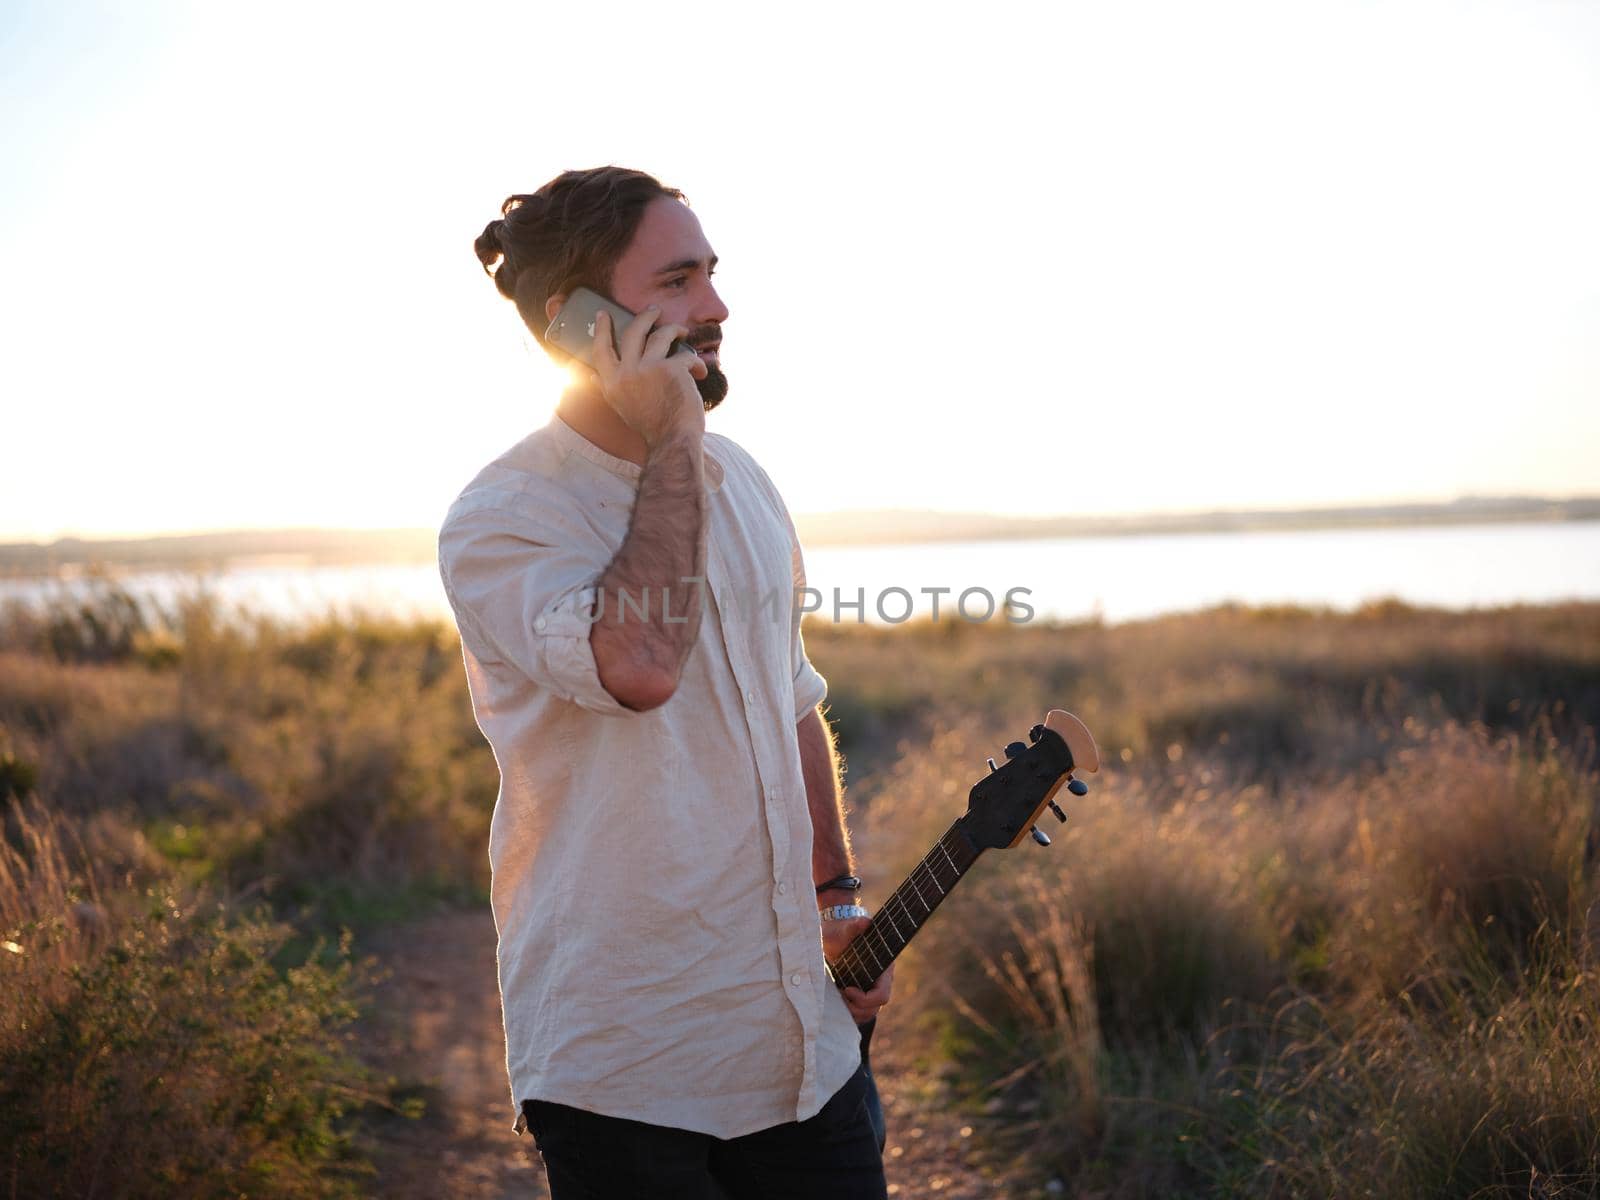 male guitarist calling on the phone in the nature blocking out the sun with his body, horizontal waist up view